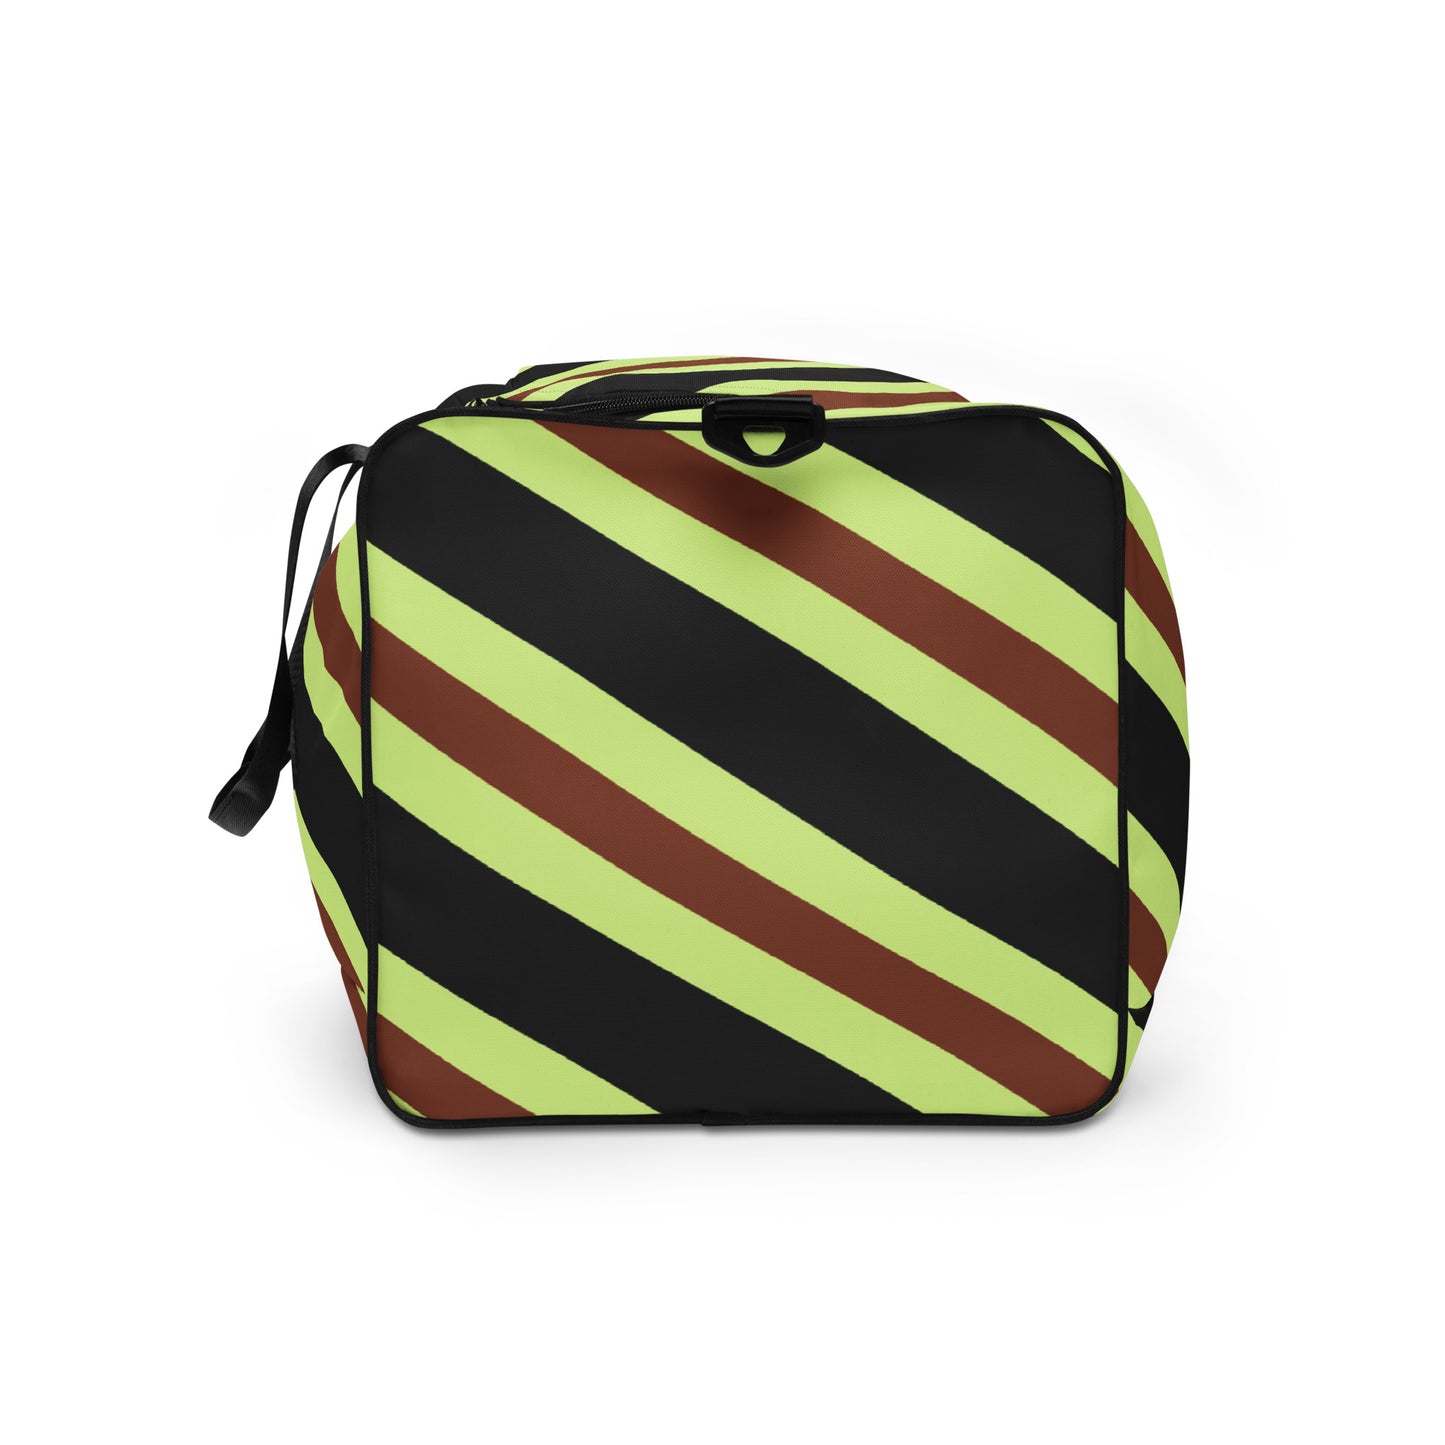 Retro Stripes - Inspired By Harry Styles - Sustainably Made  Duffle bag